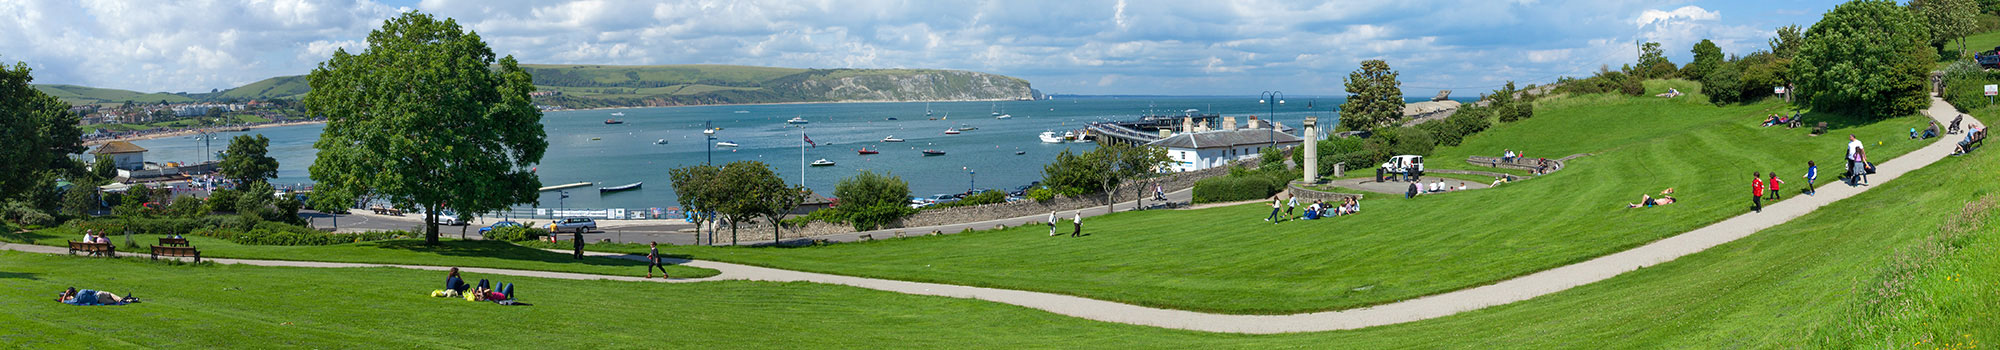 History of Swanage and the Isle of Purbeck